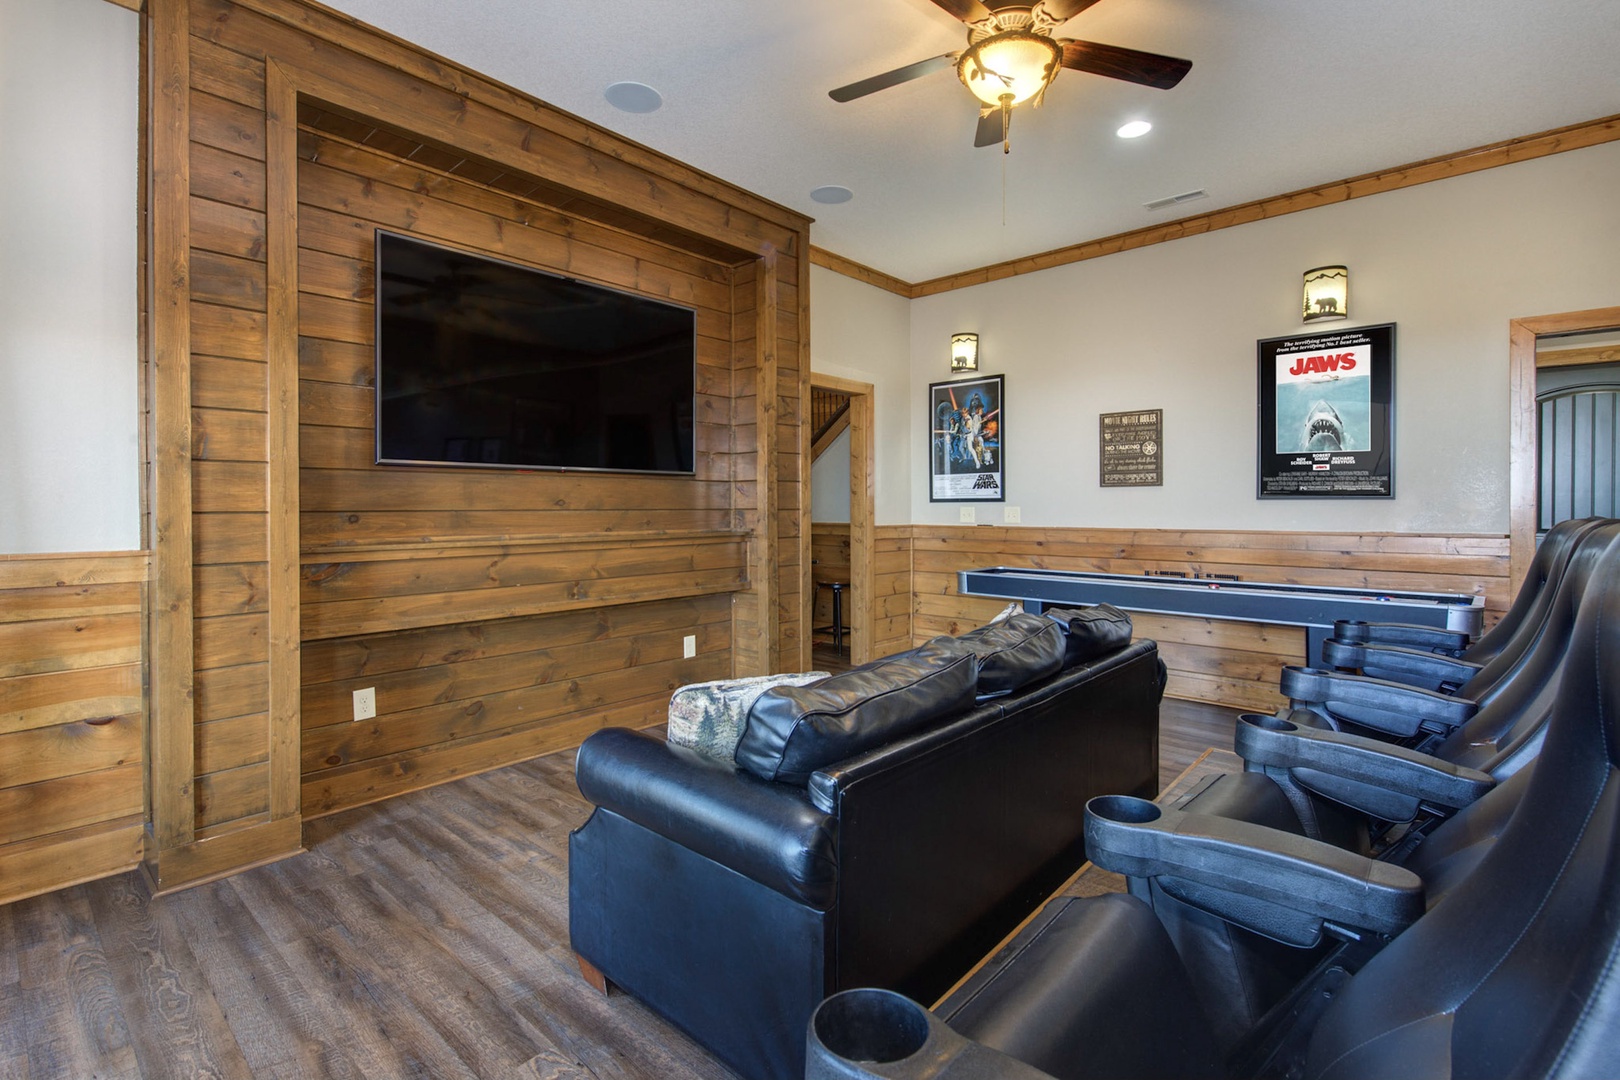 Downstairs theater room - a paradise for movie and shuffleboard enthusiasts!